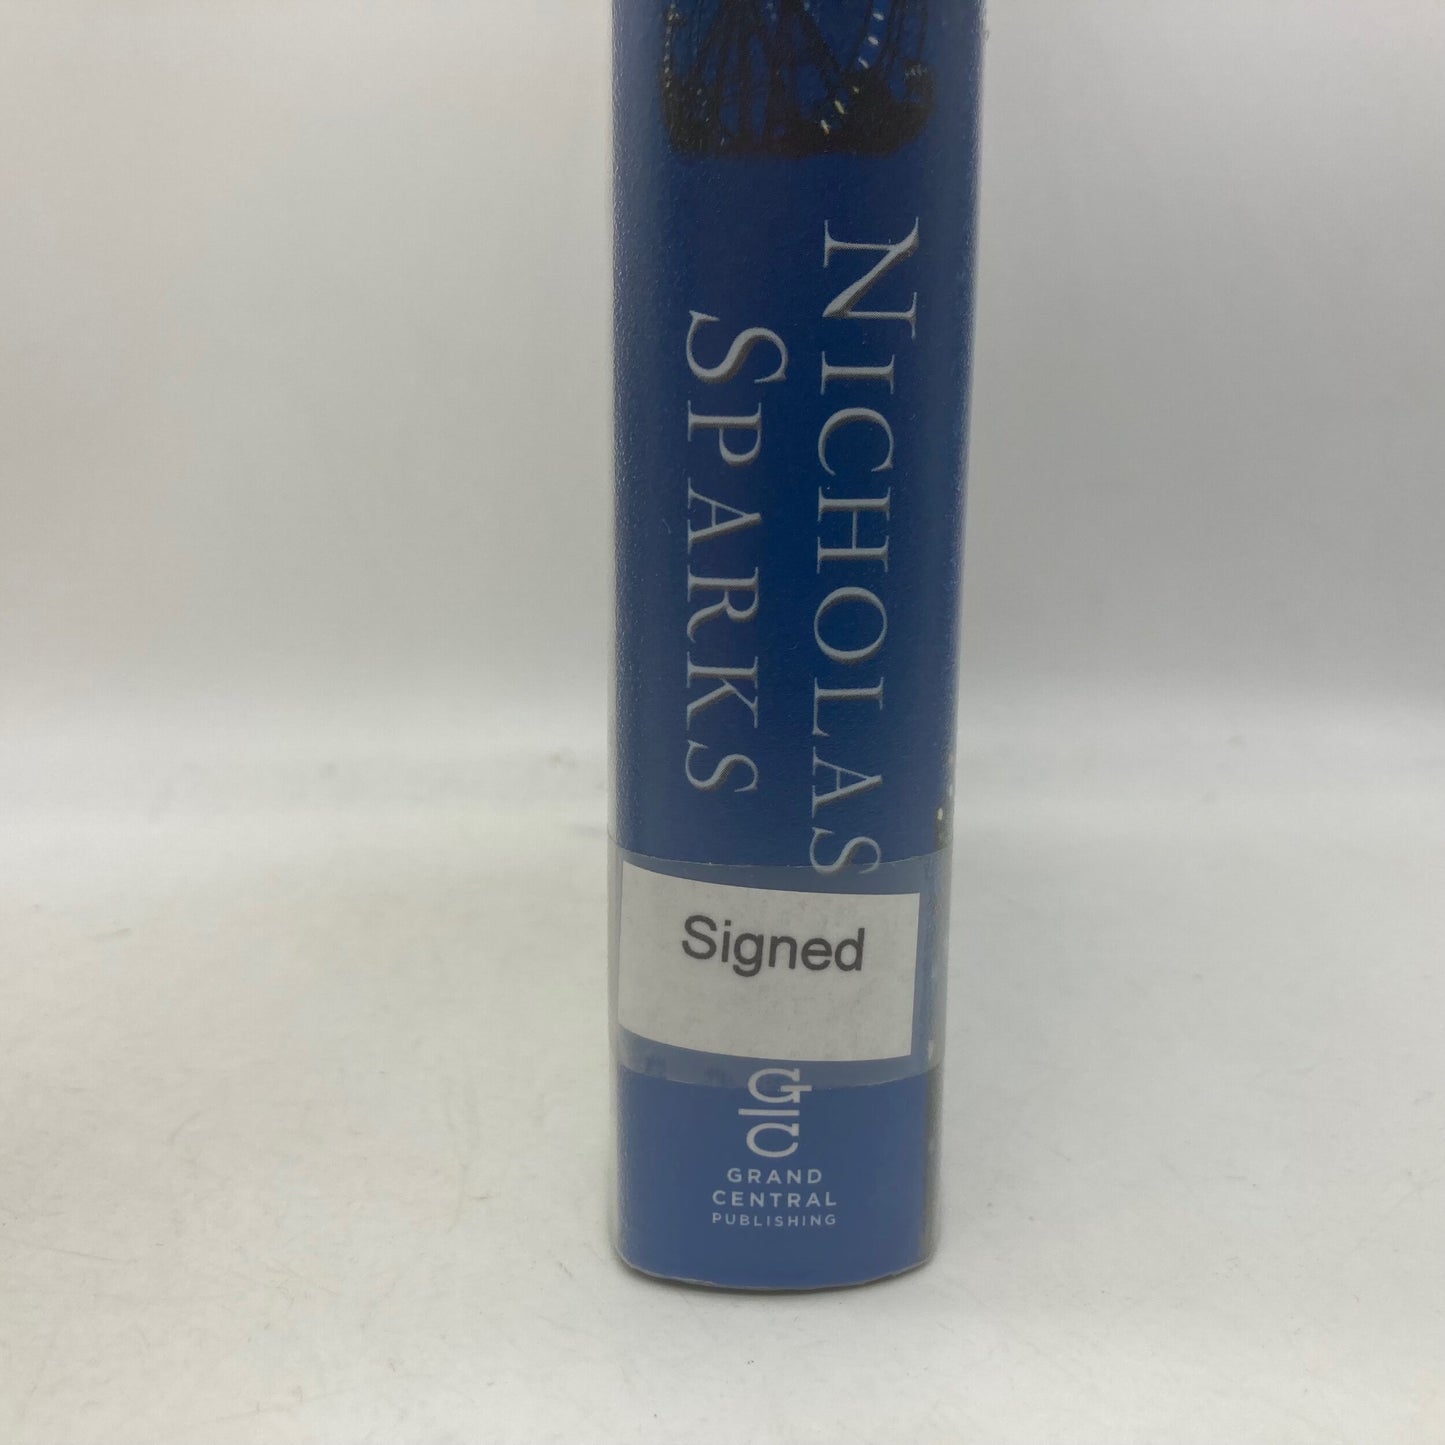 SPARKS, Nicholas "The Lucky One" [Grand Central Publishing, 2008] 1st Edition (Signed) - Buzz Bookstore